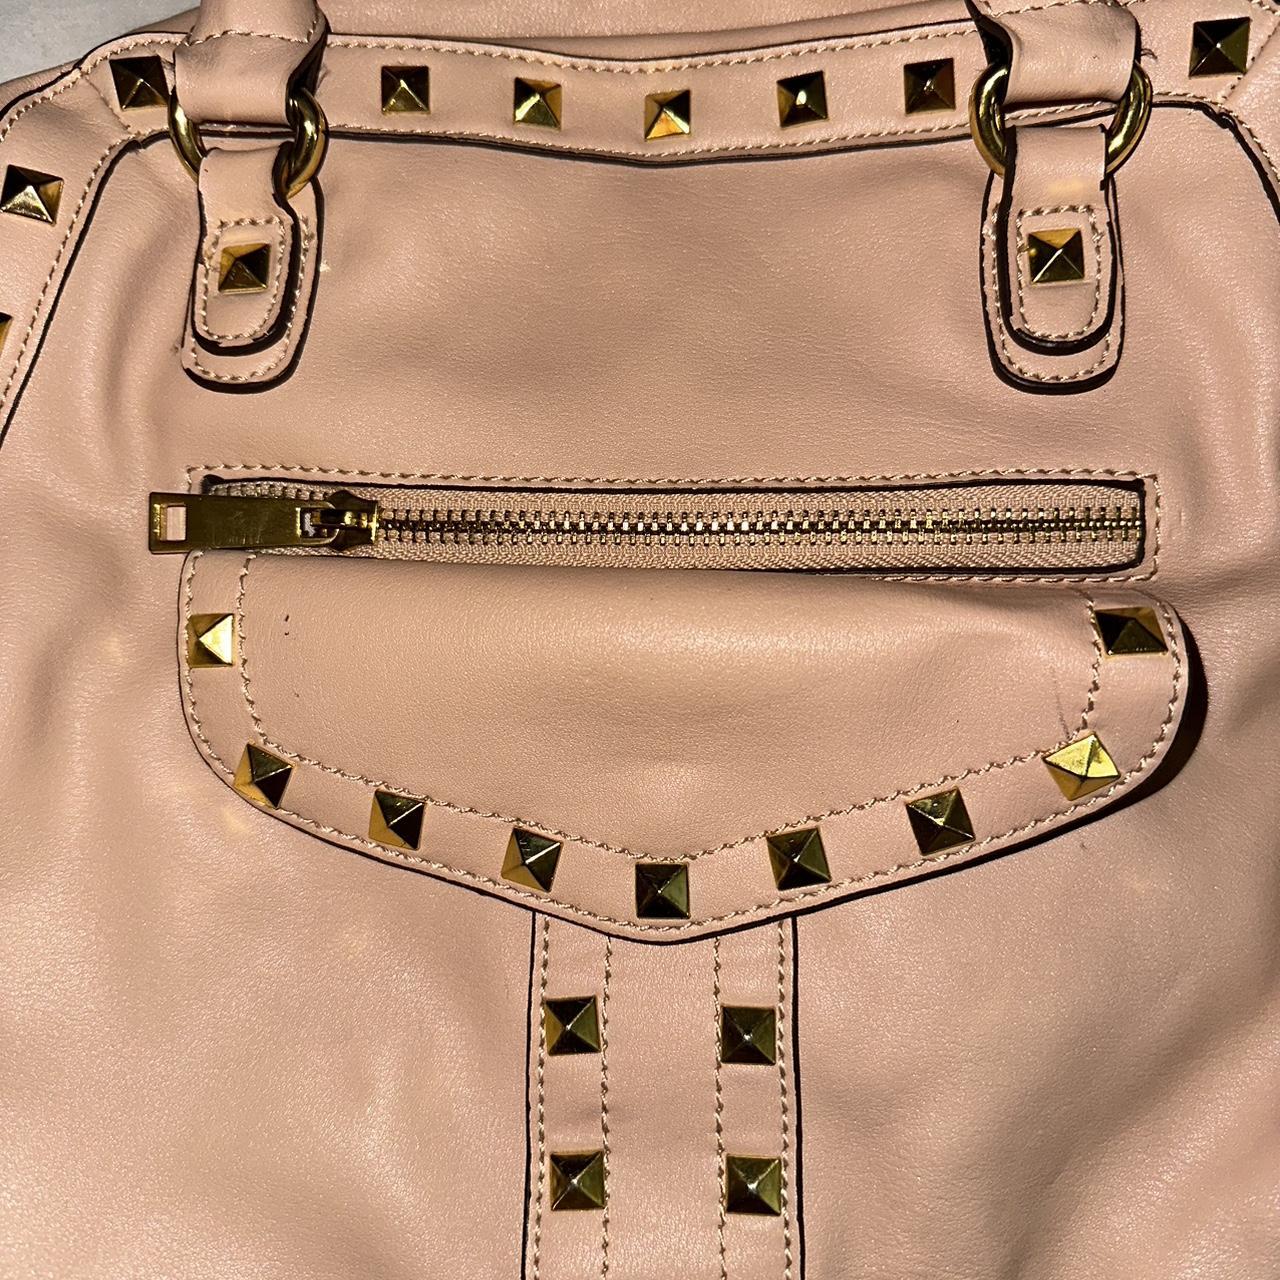 Jessica Simpson Women's Tan and Gold Bag (4)